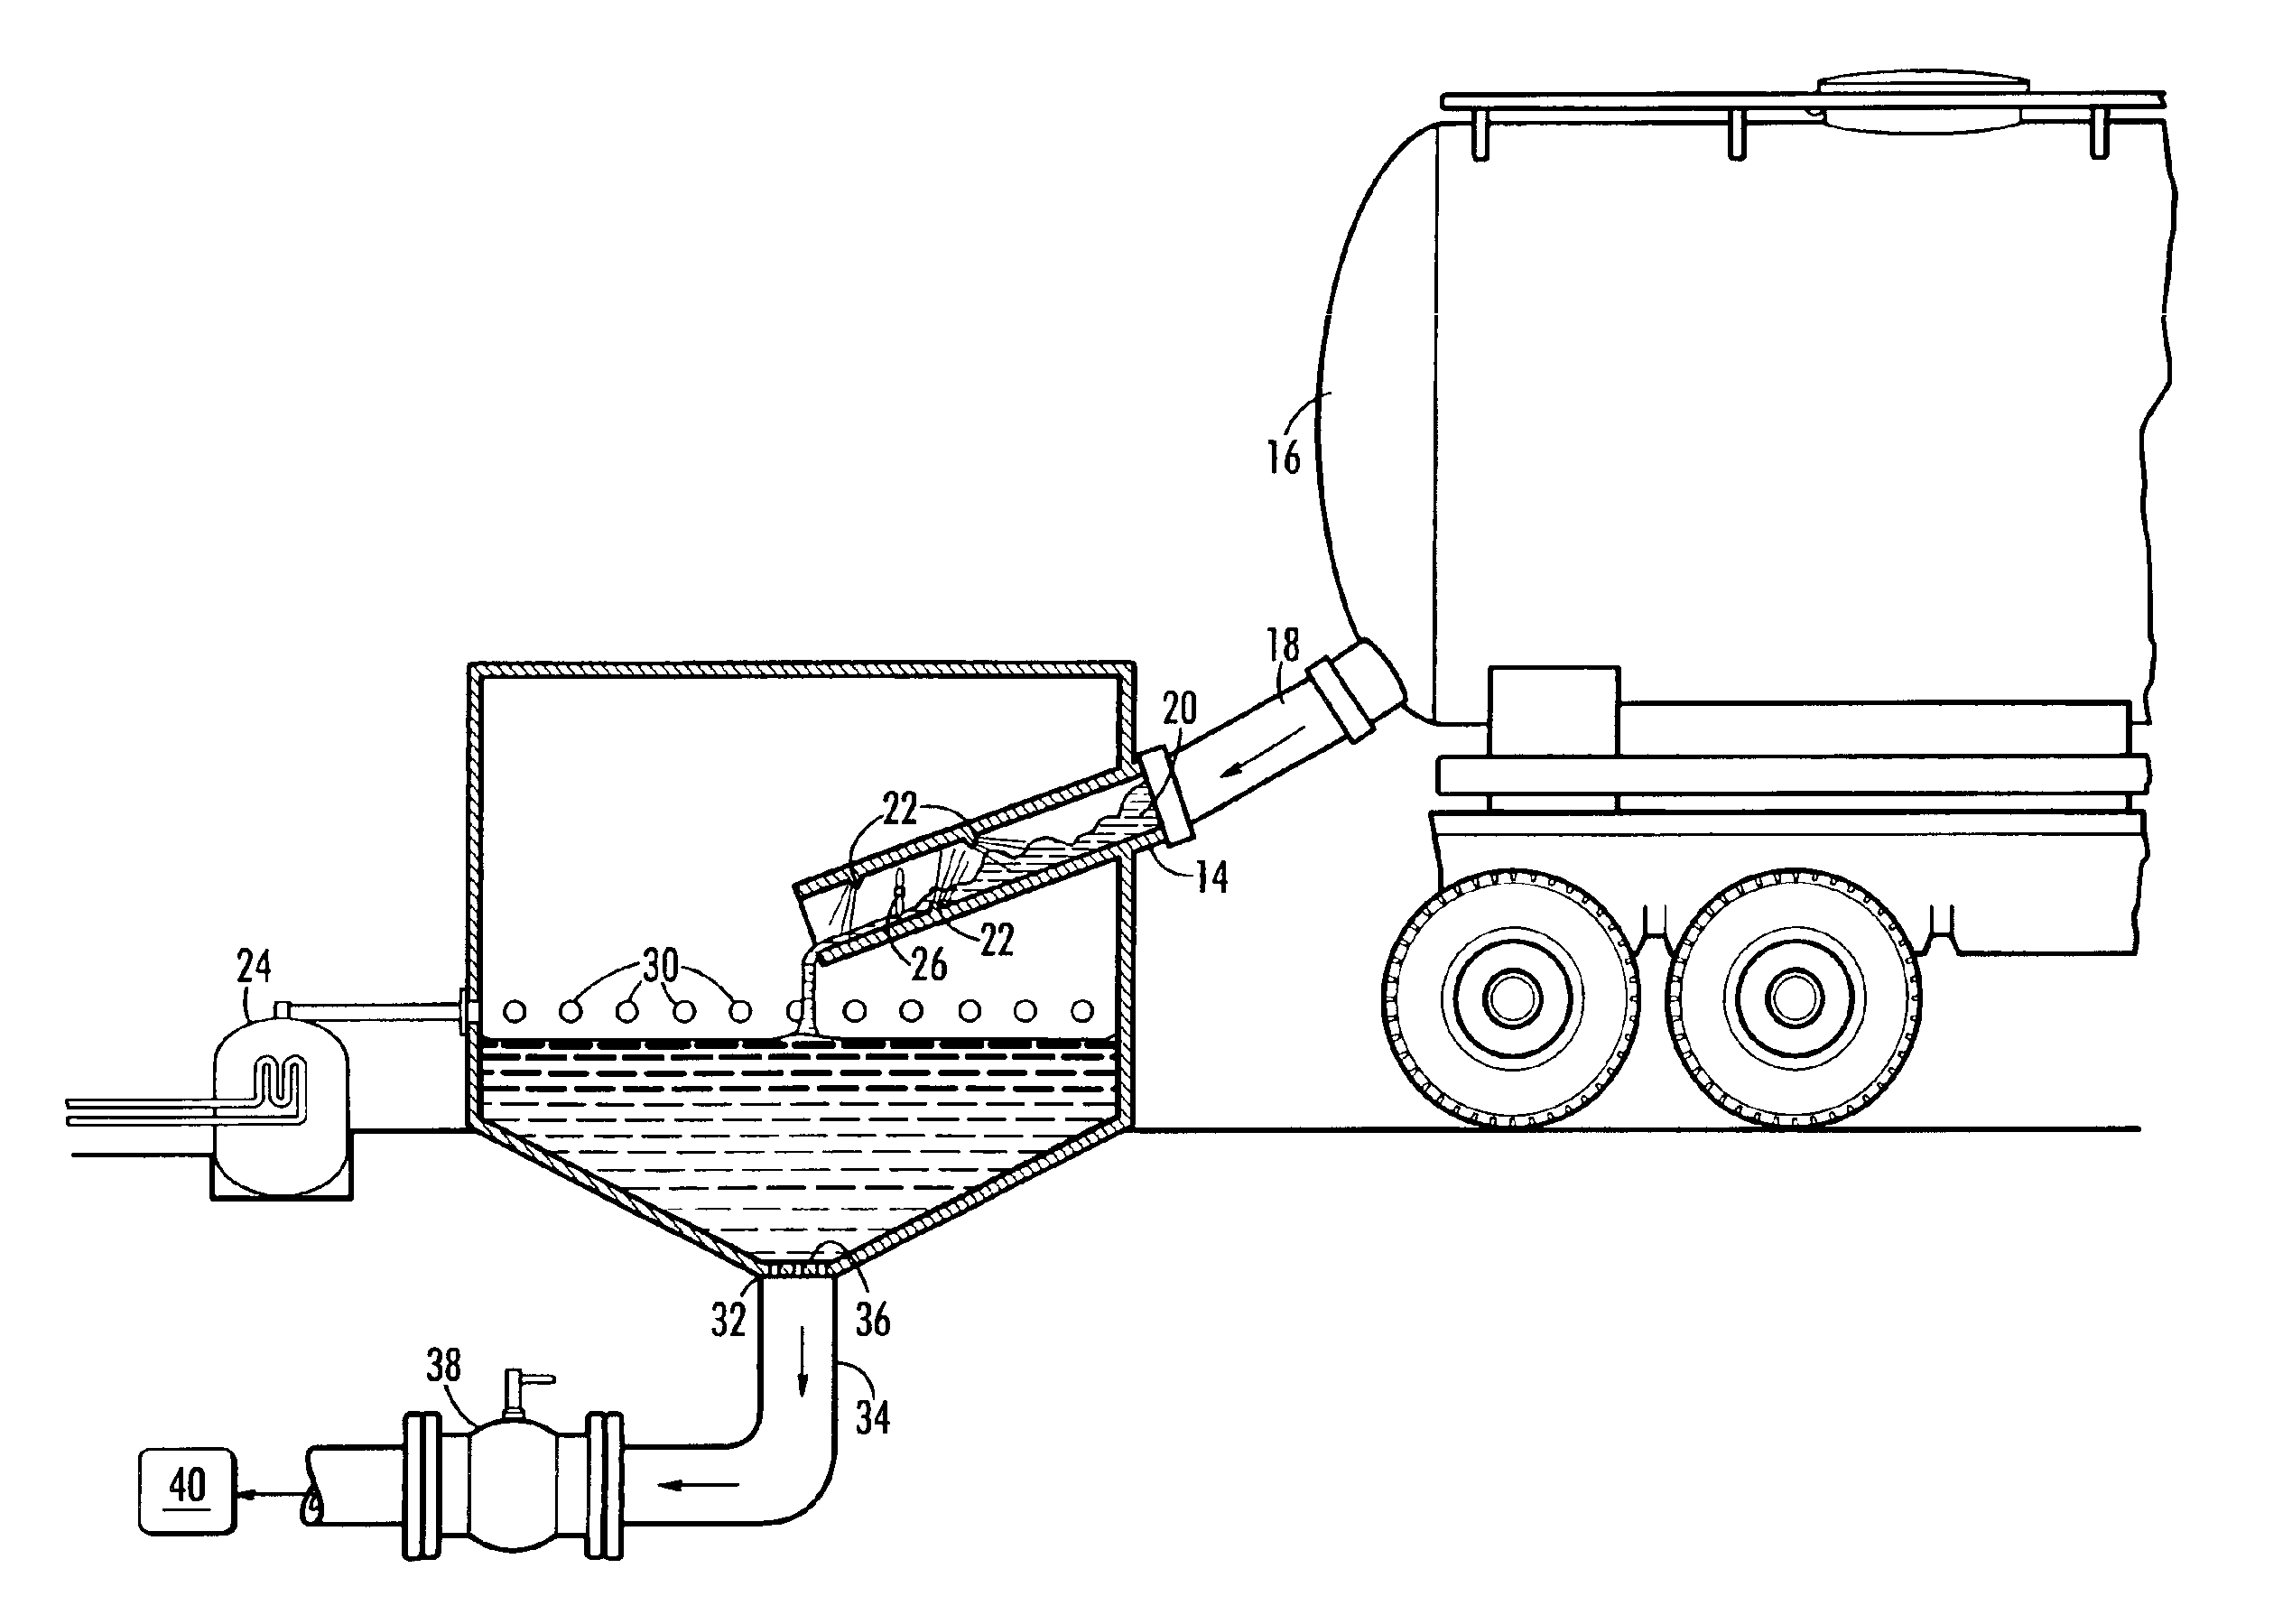 Waste processing system